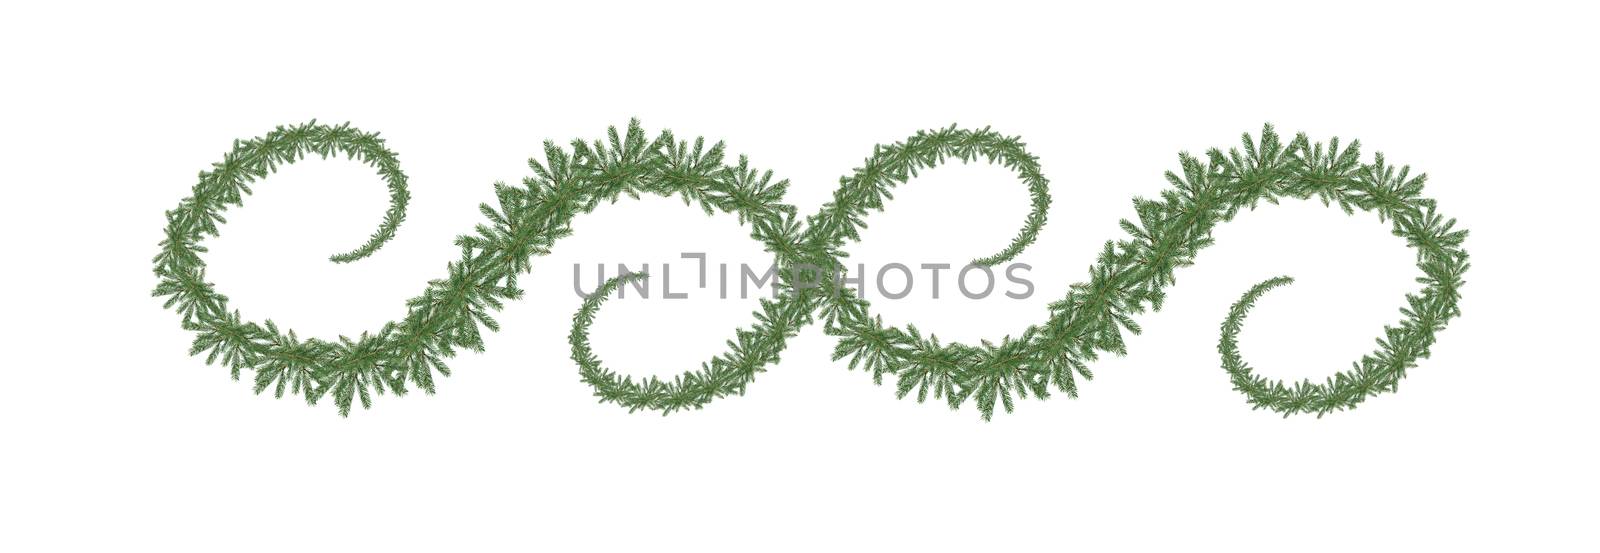 Abstract Christmas ornament made from fir twigs on white background